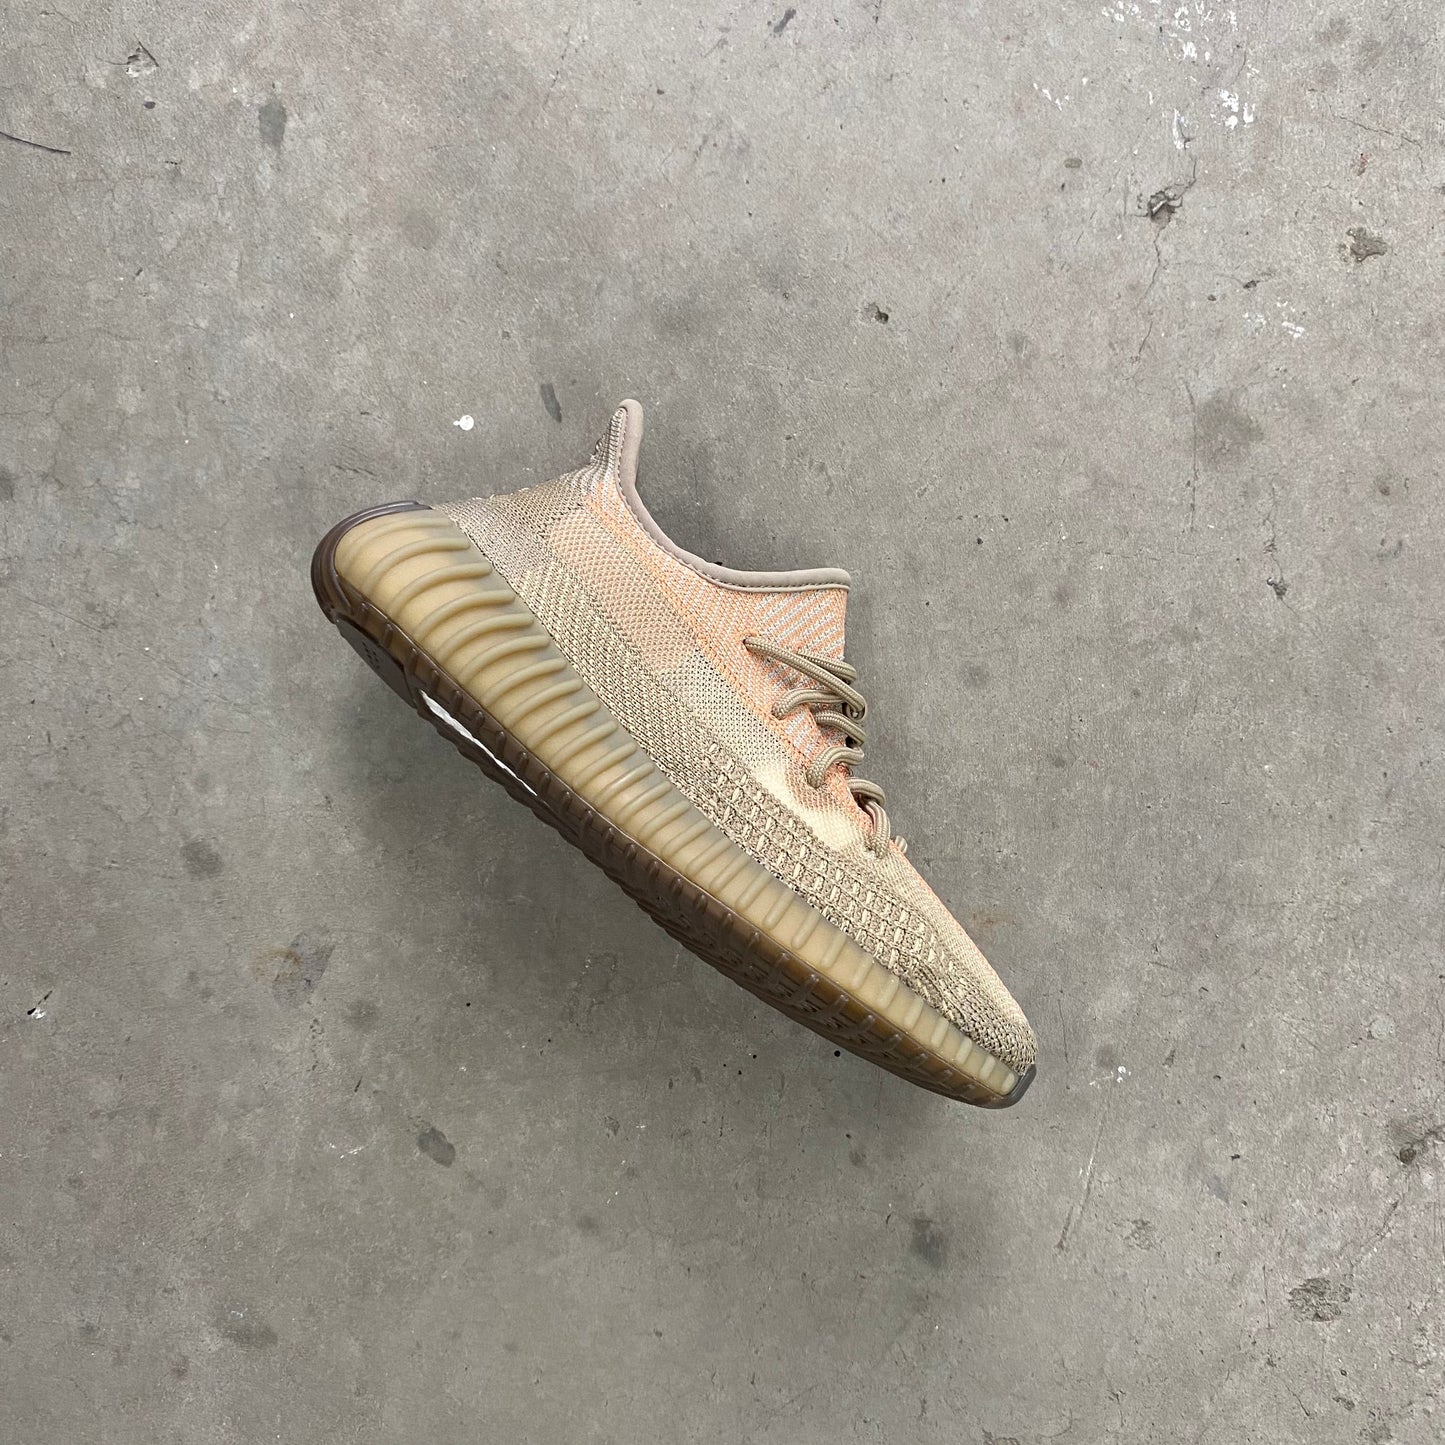 Yeezy 350 V2 - Sand Taupe